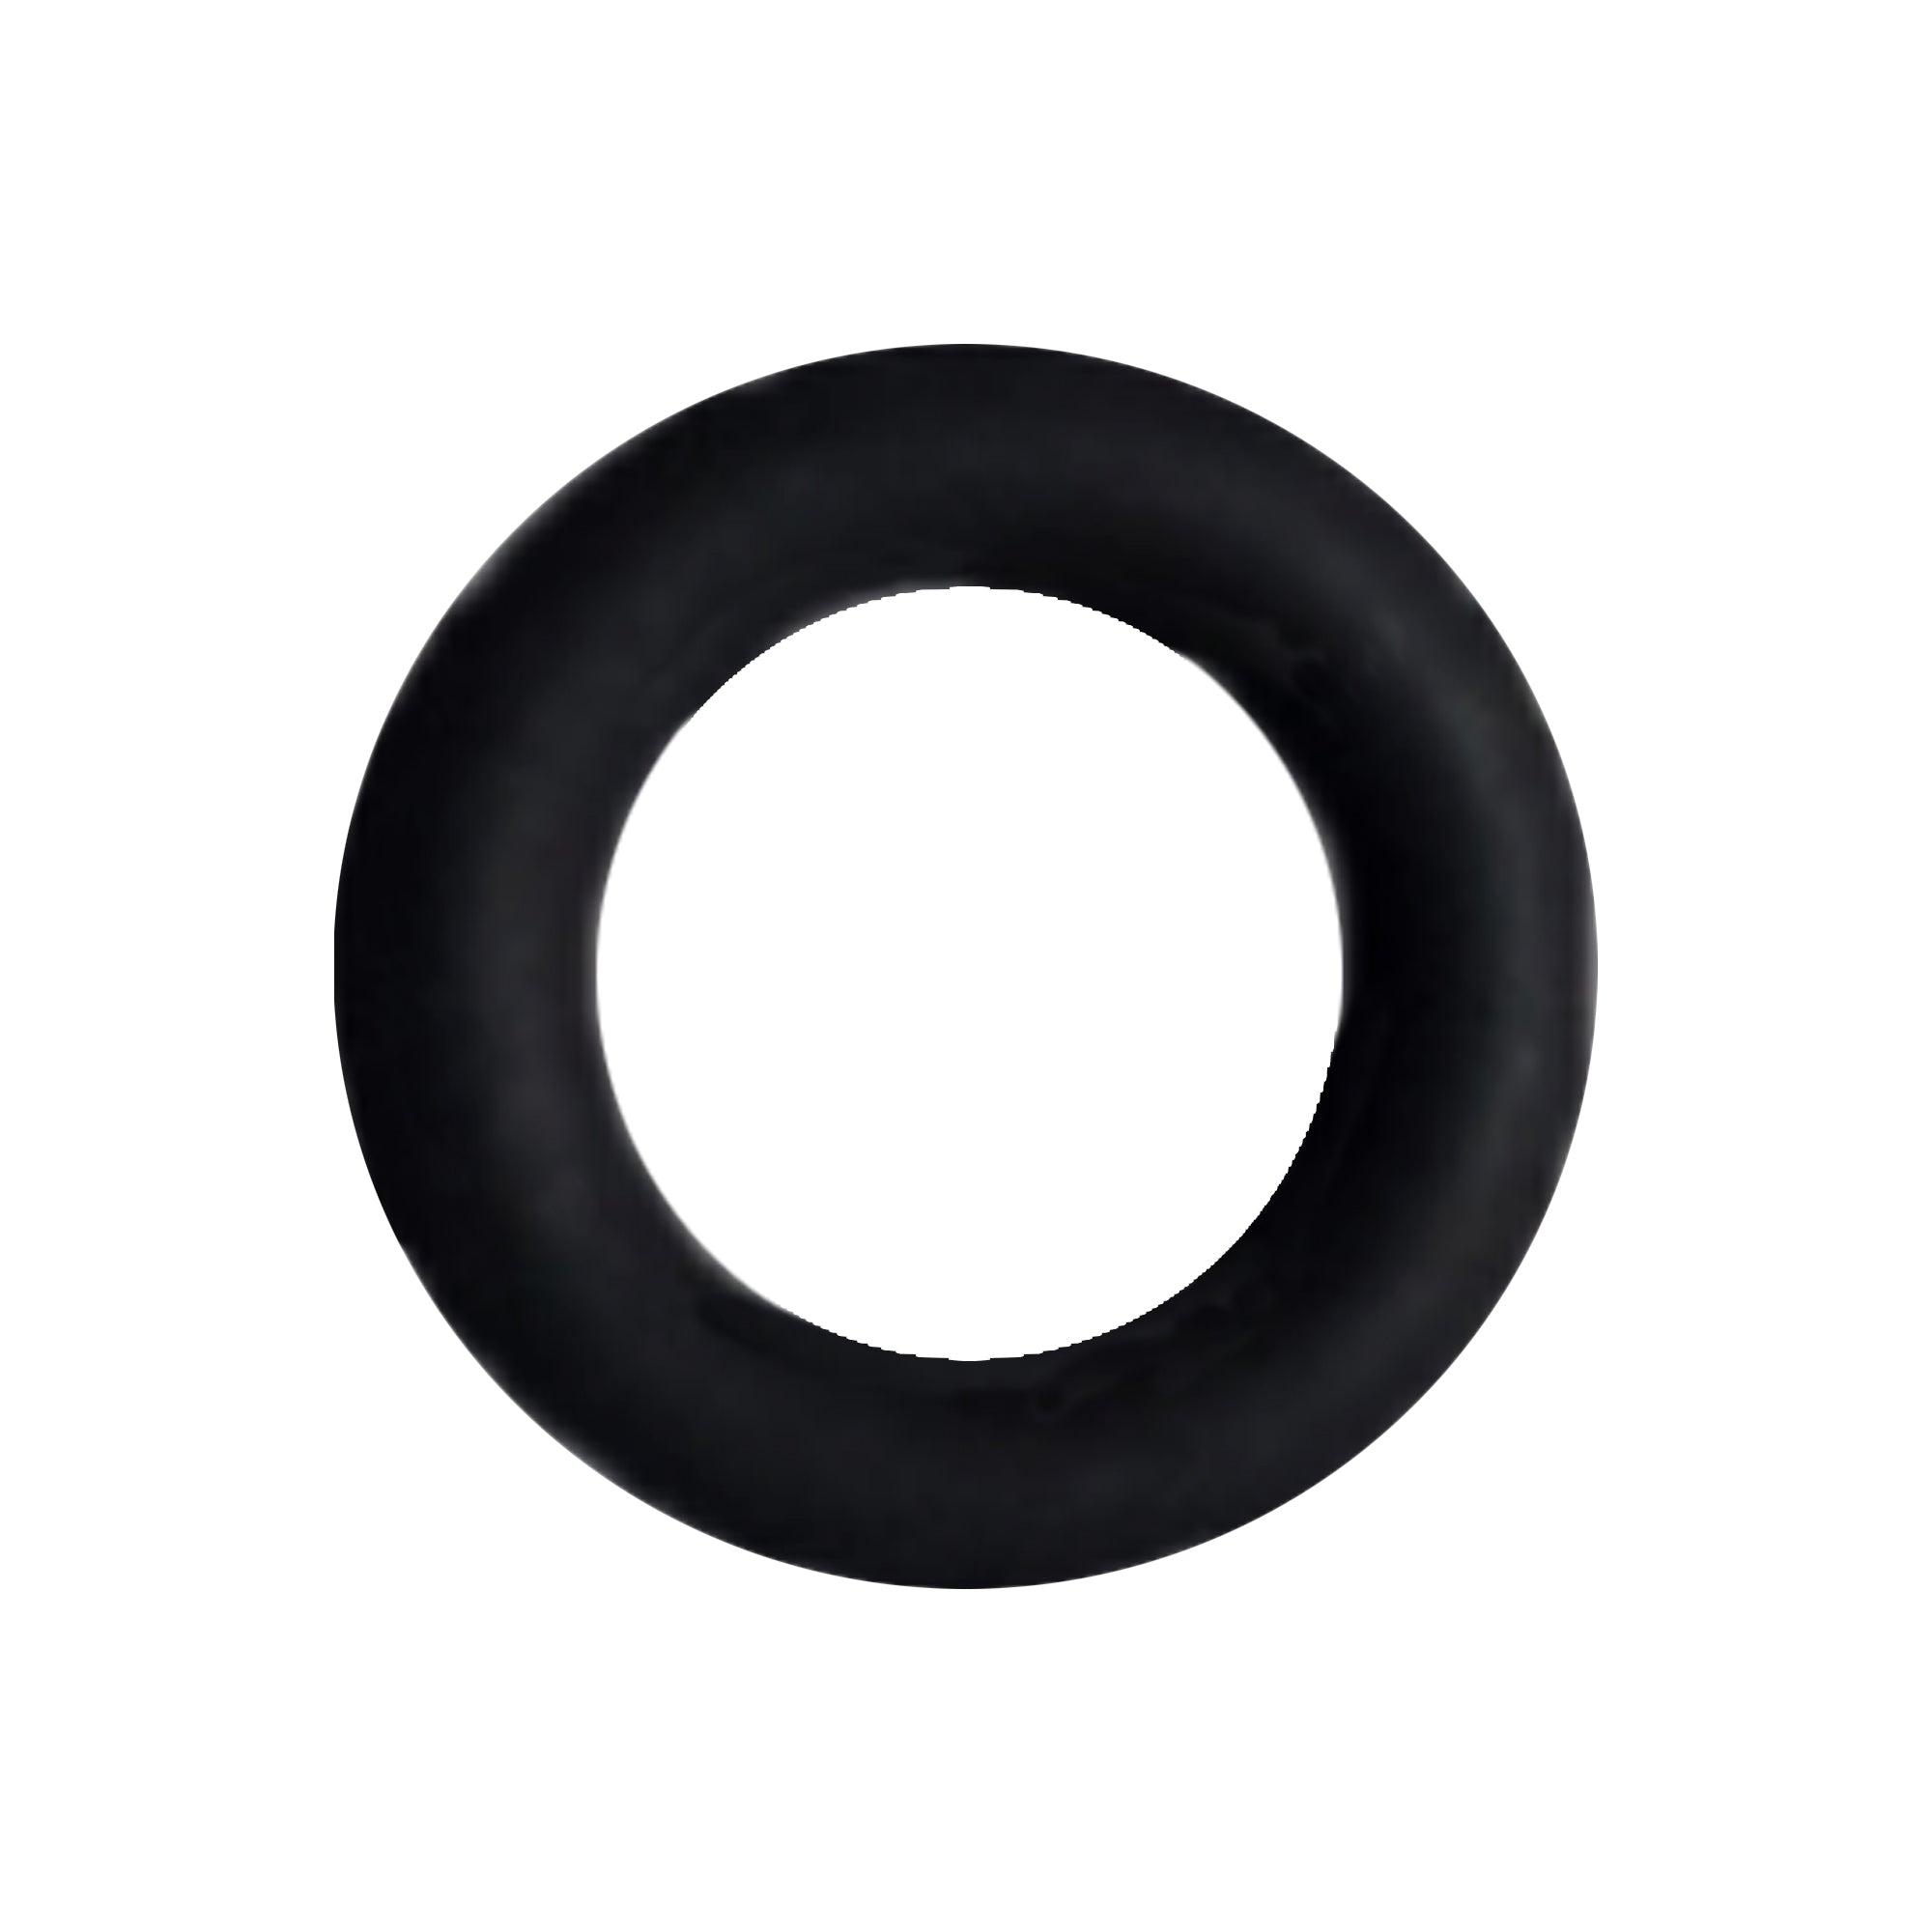 246354 - O-Ring, Package of 6 - PURspray